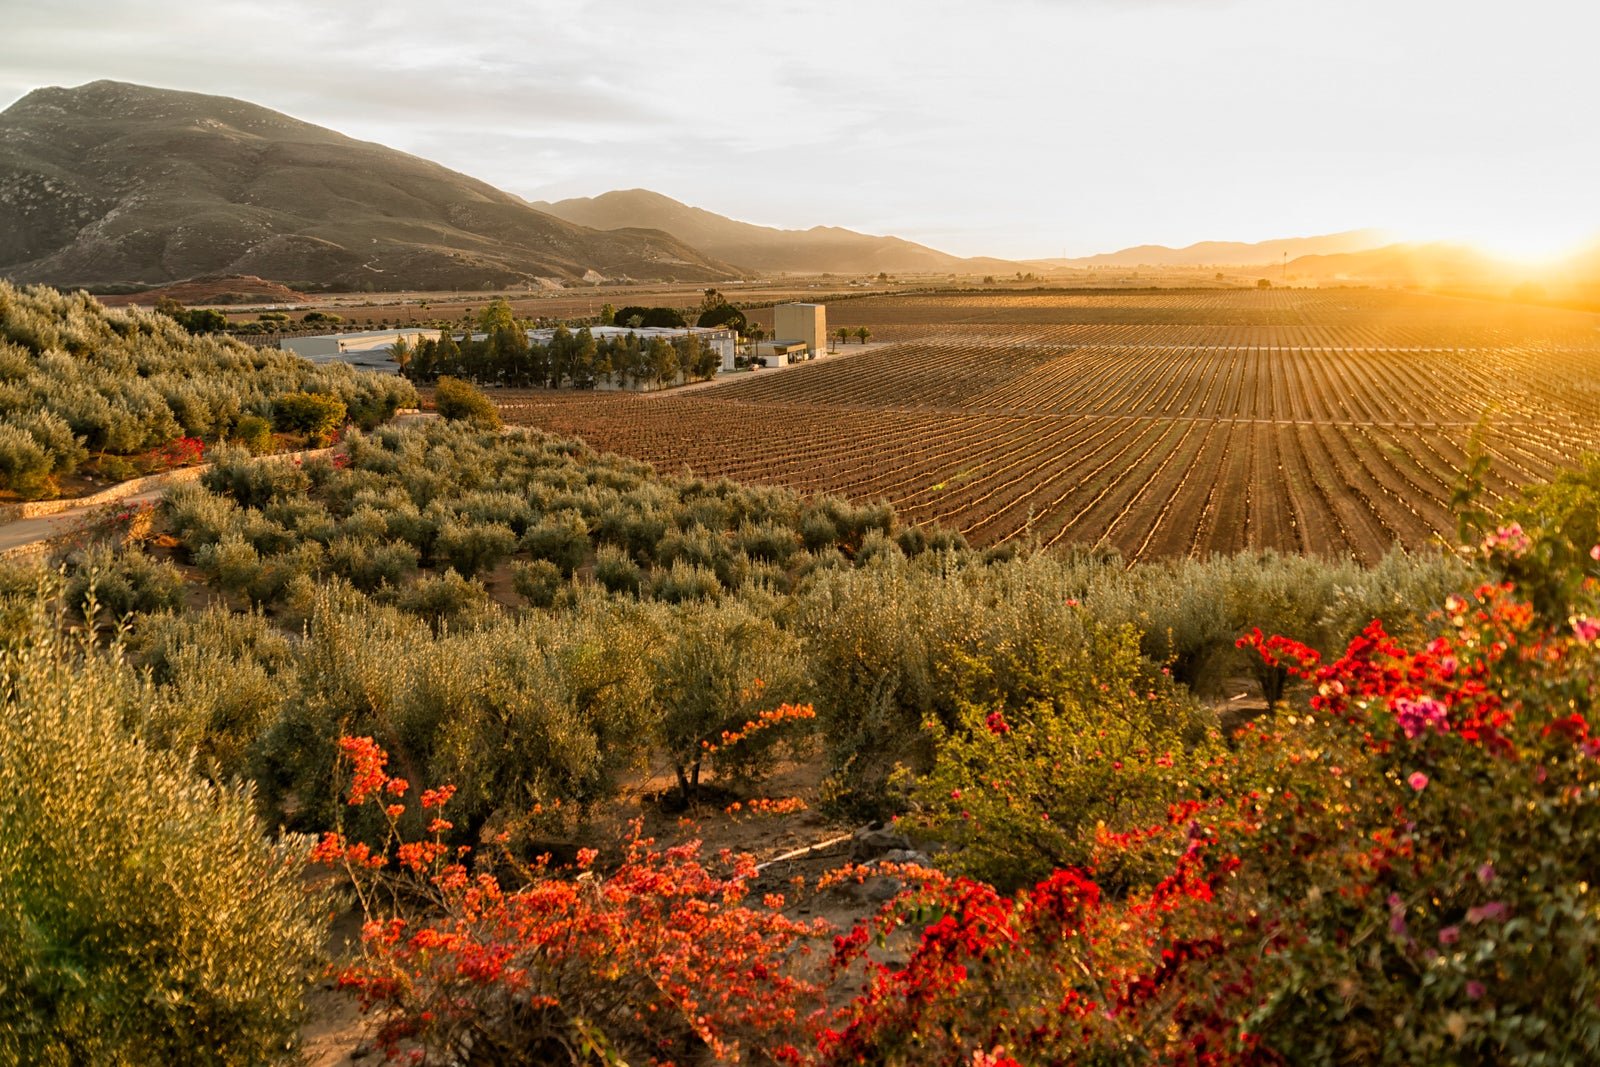 TPG's guide to Mexico's answer to Napa Valley: Valle de Guadalupe